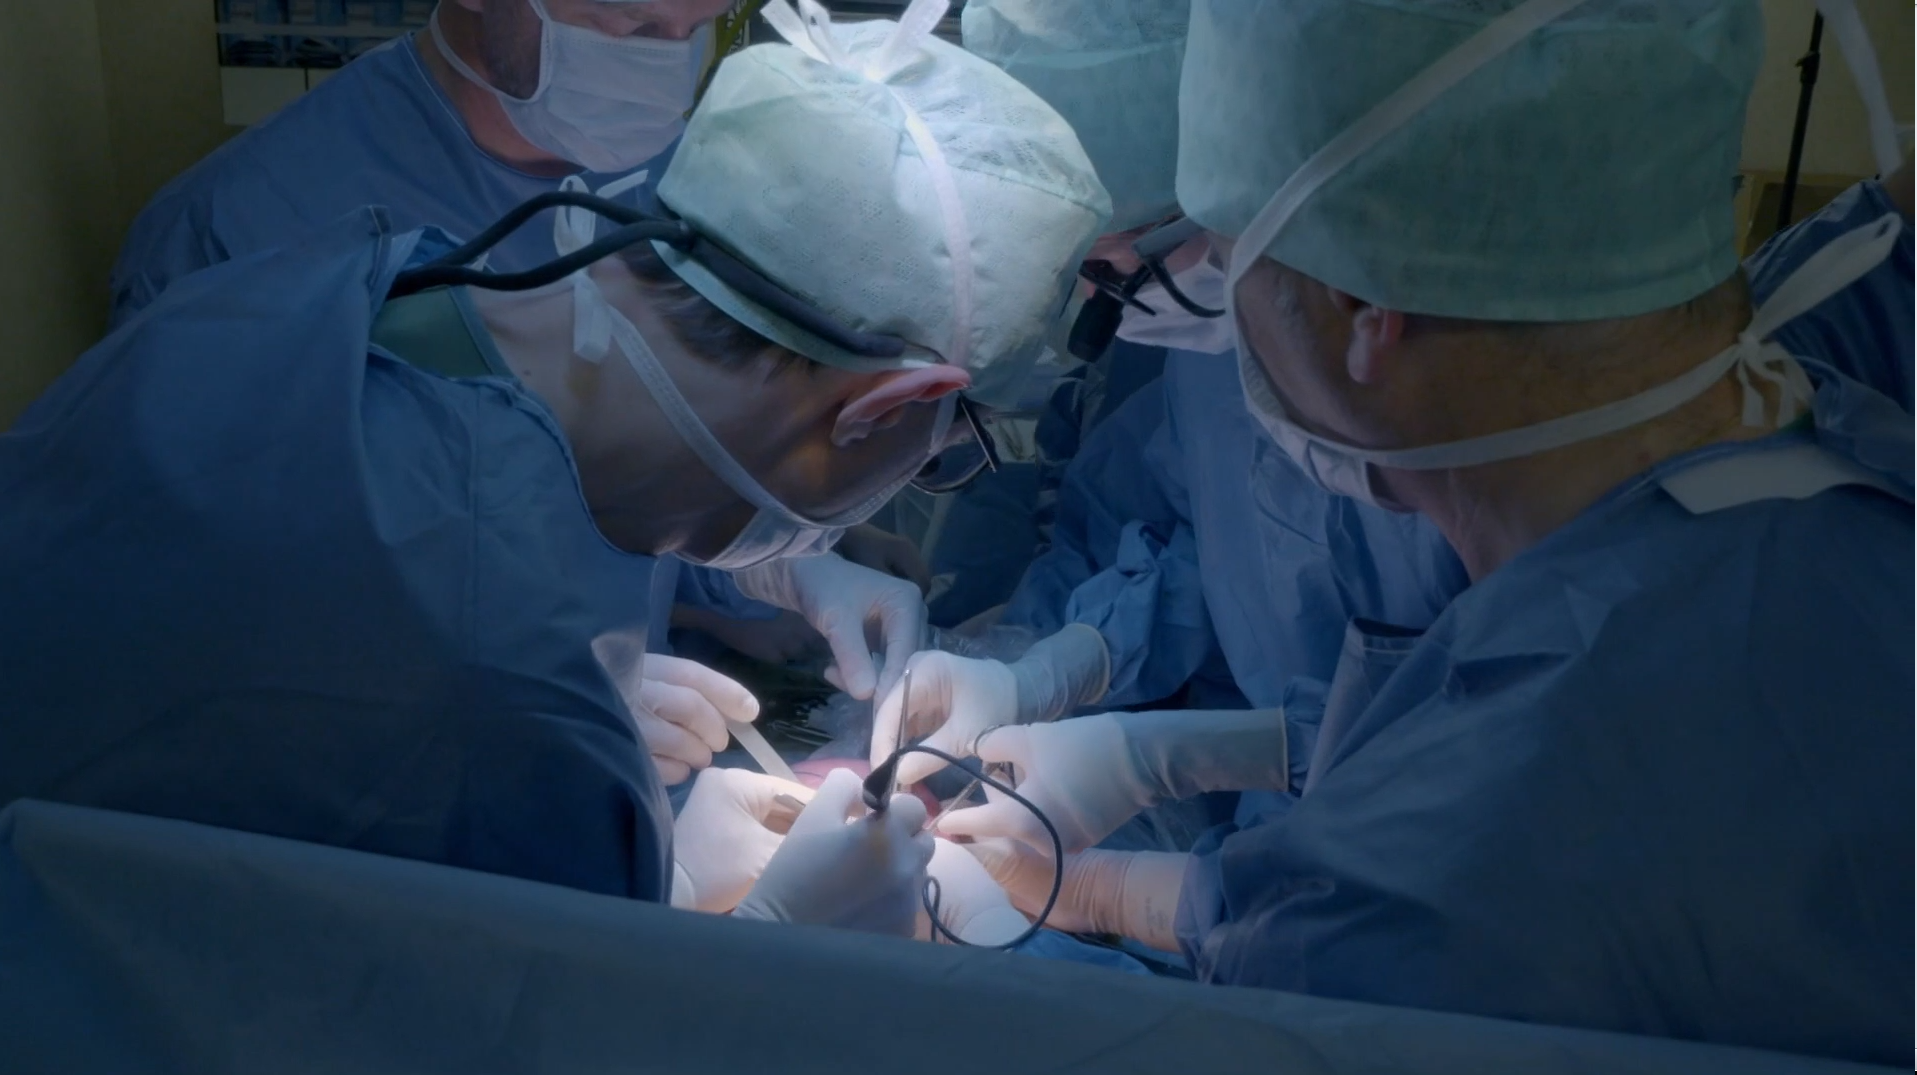 Dominic Thompson operating on an unborn baby in Belgium under the supervision of leading foetal surgeon Professor Jan Deprest